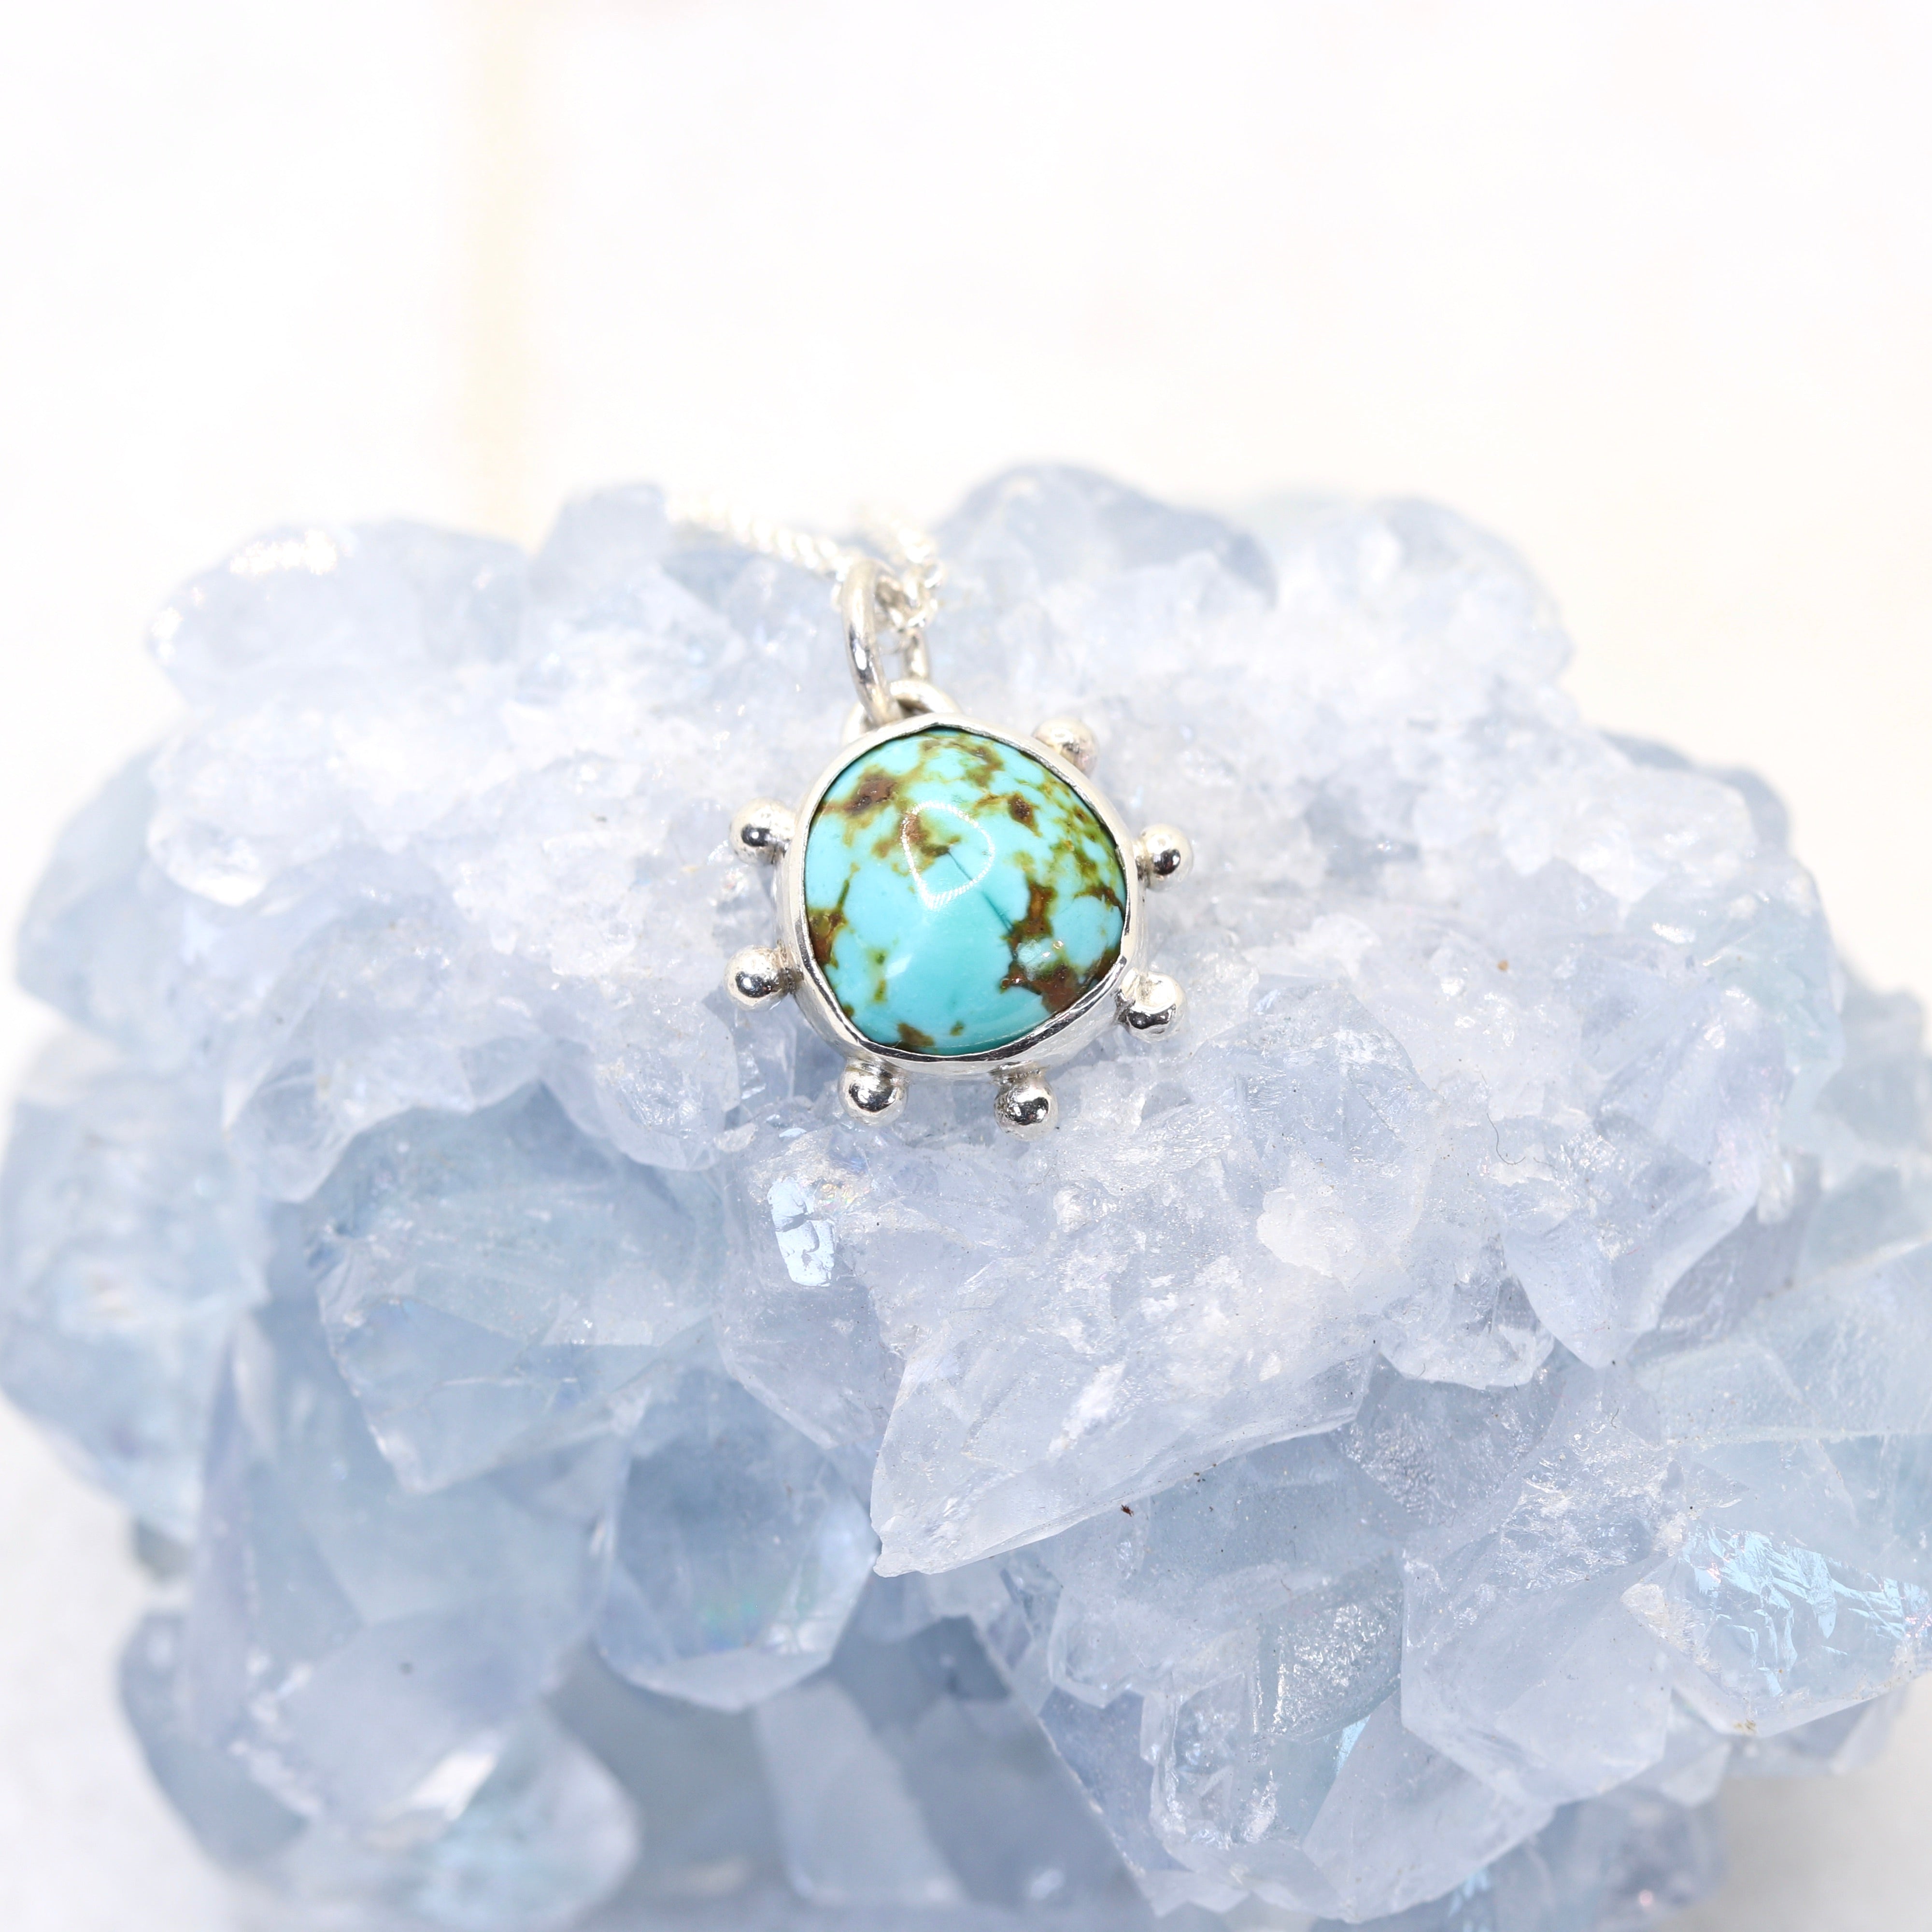 Sierra Nevada Turquoise | Sun Relic Necklace